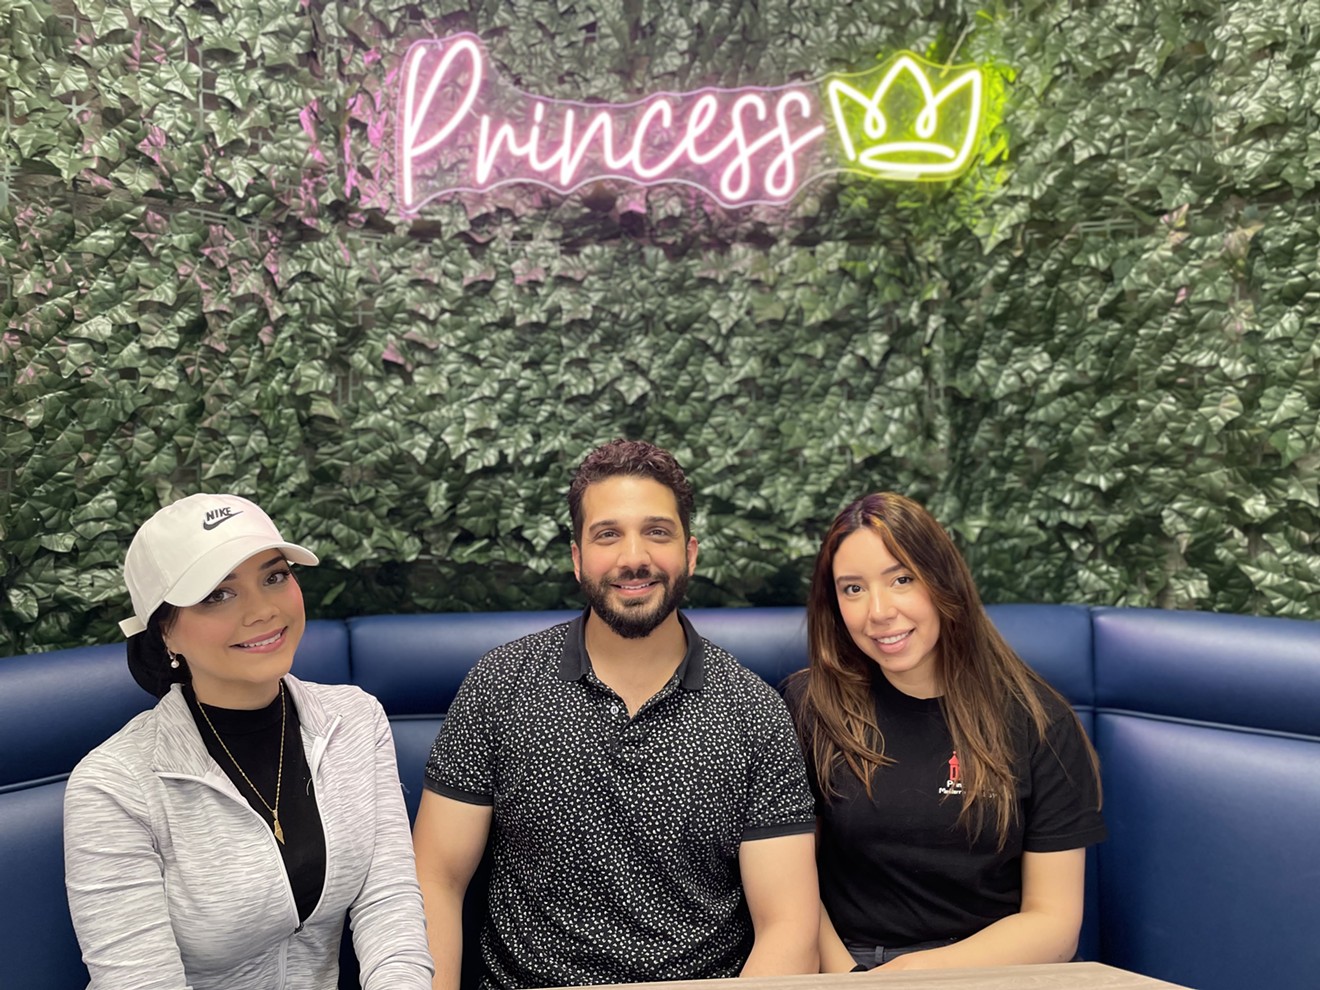 Deena Alsadi, her brother Noor Alsadi, and his wife Amirah Rafati are expanding their family business with new restaurant Princess Pita.